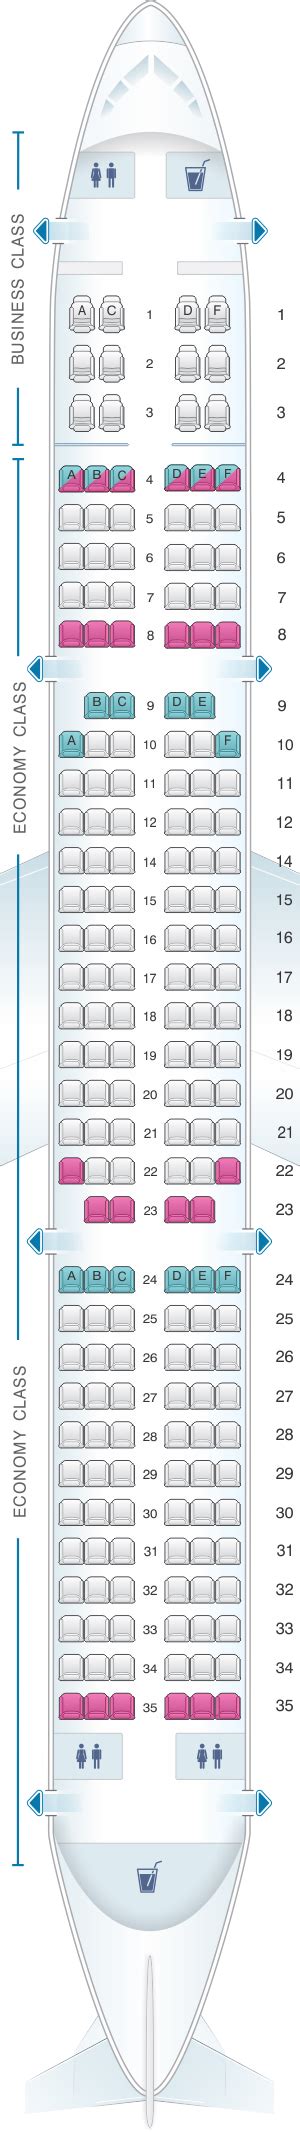 United Airbus A321 Seat Map